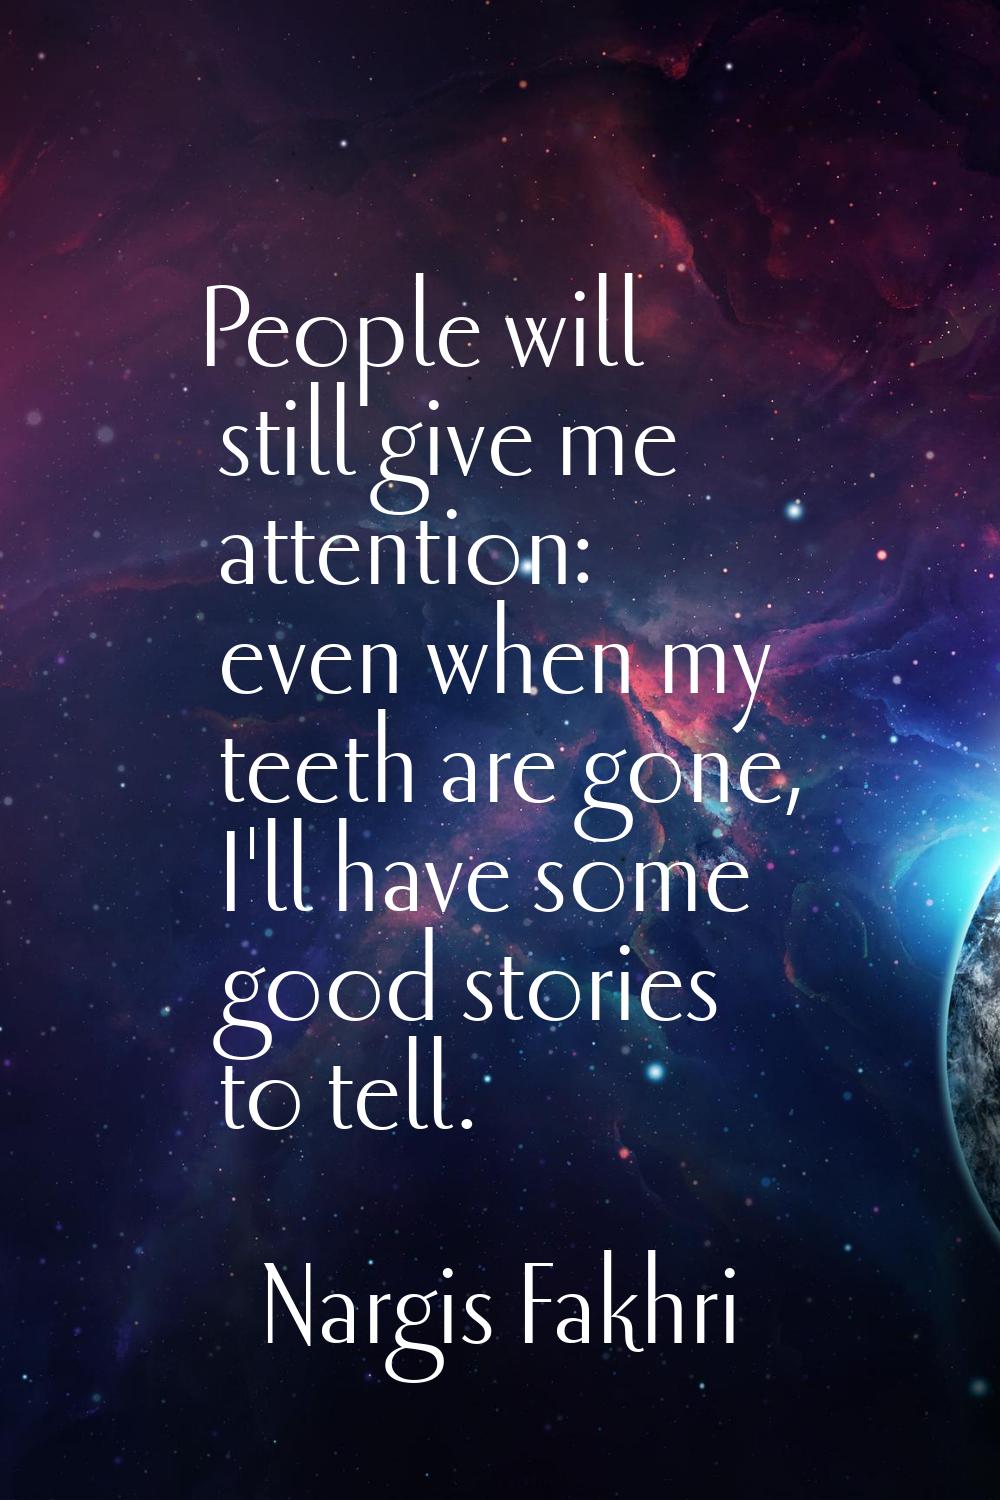 People will still give me attention: even when my teeth are gone, I'll have some good stories to te